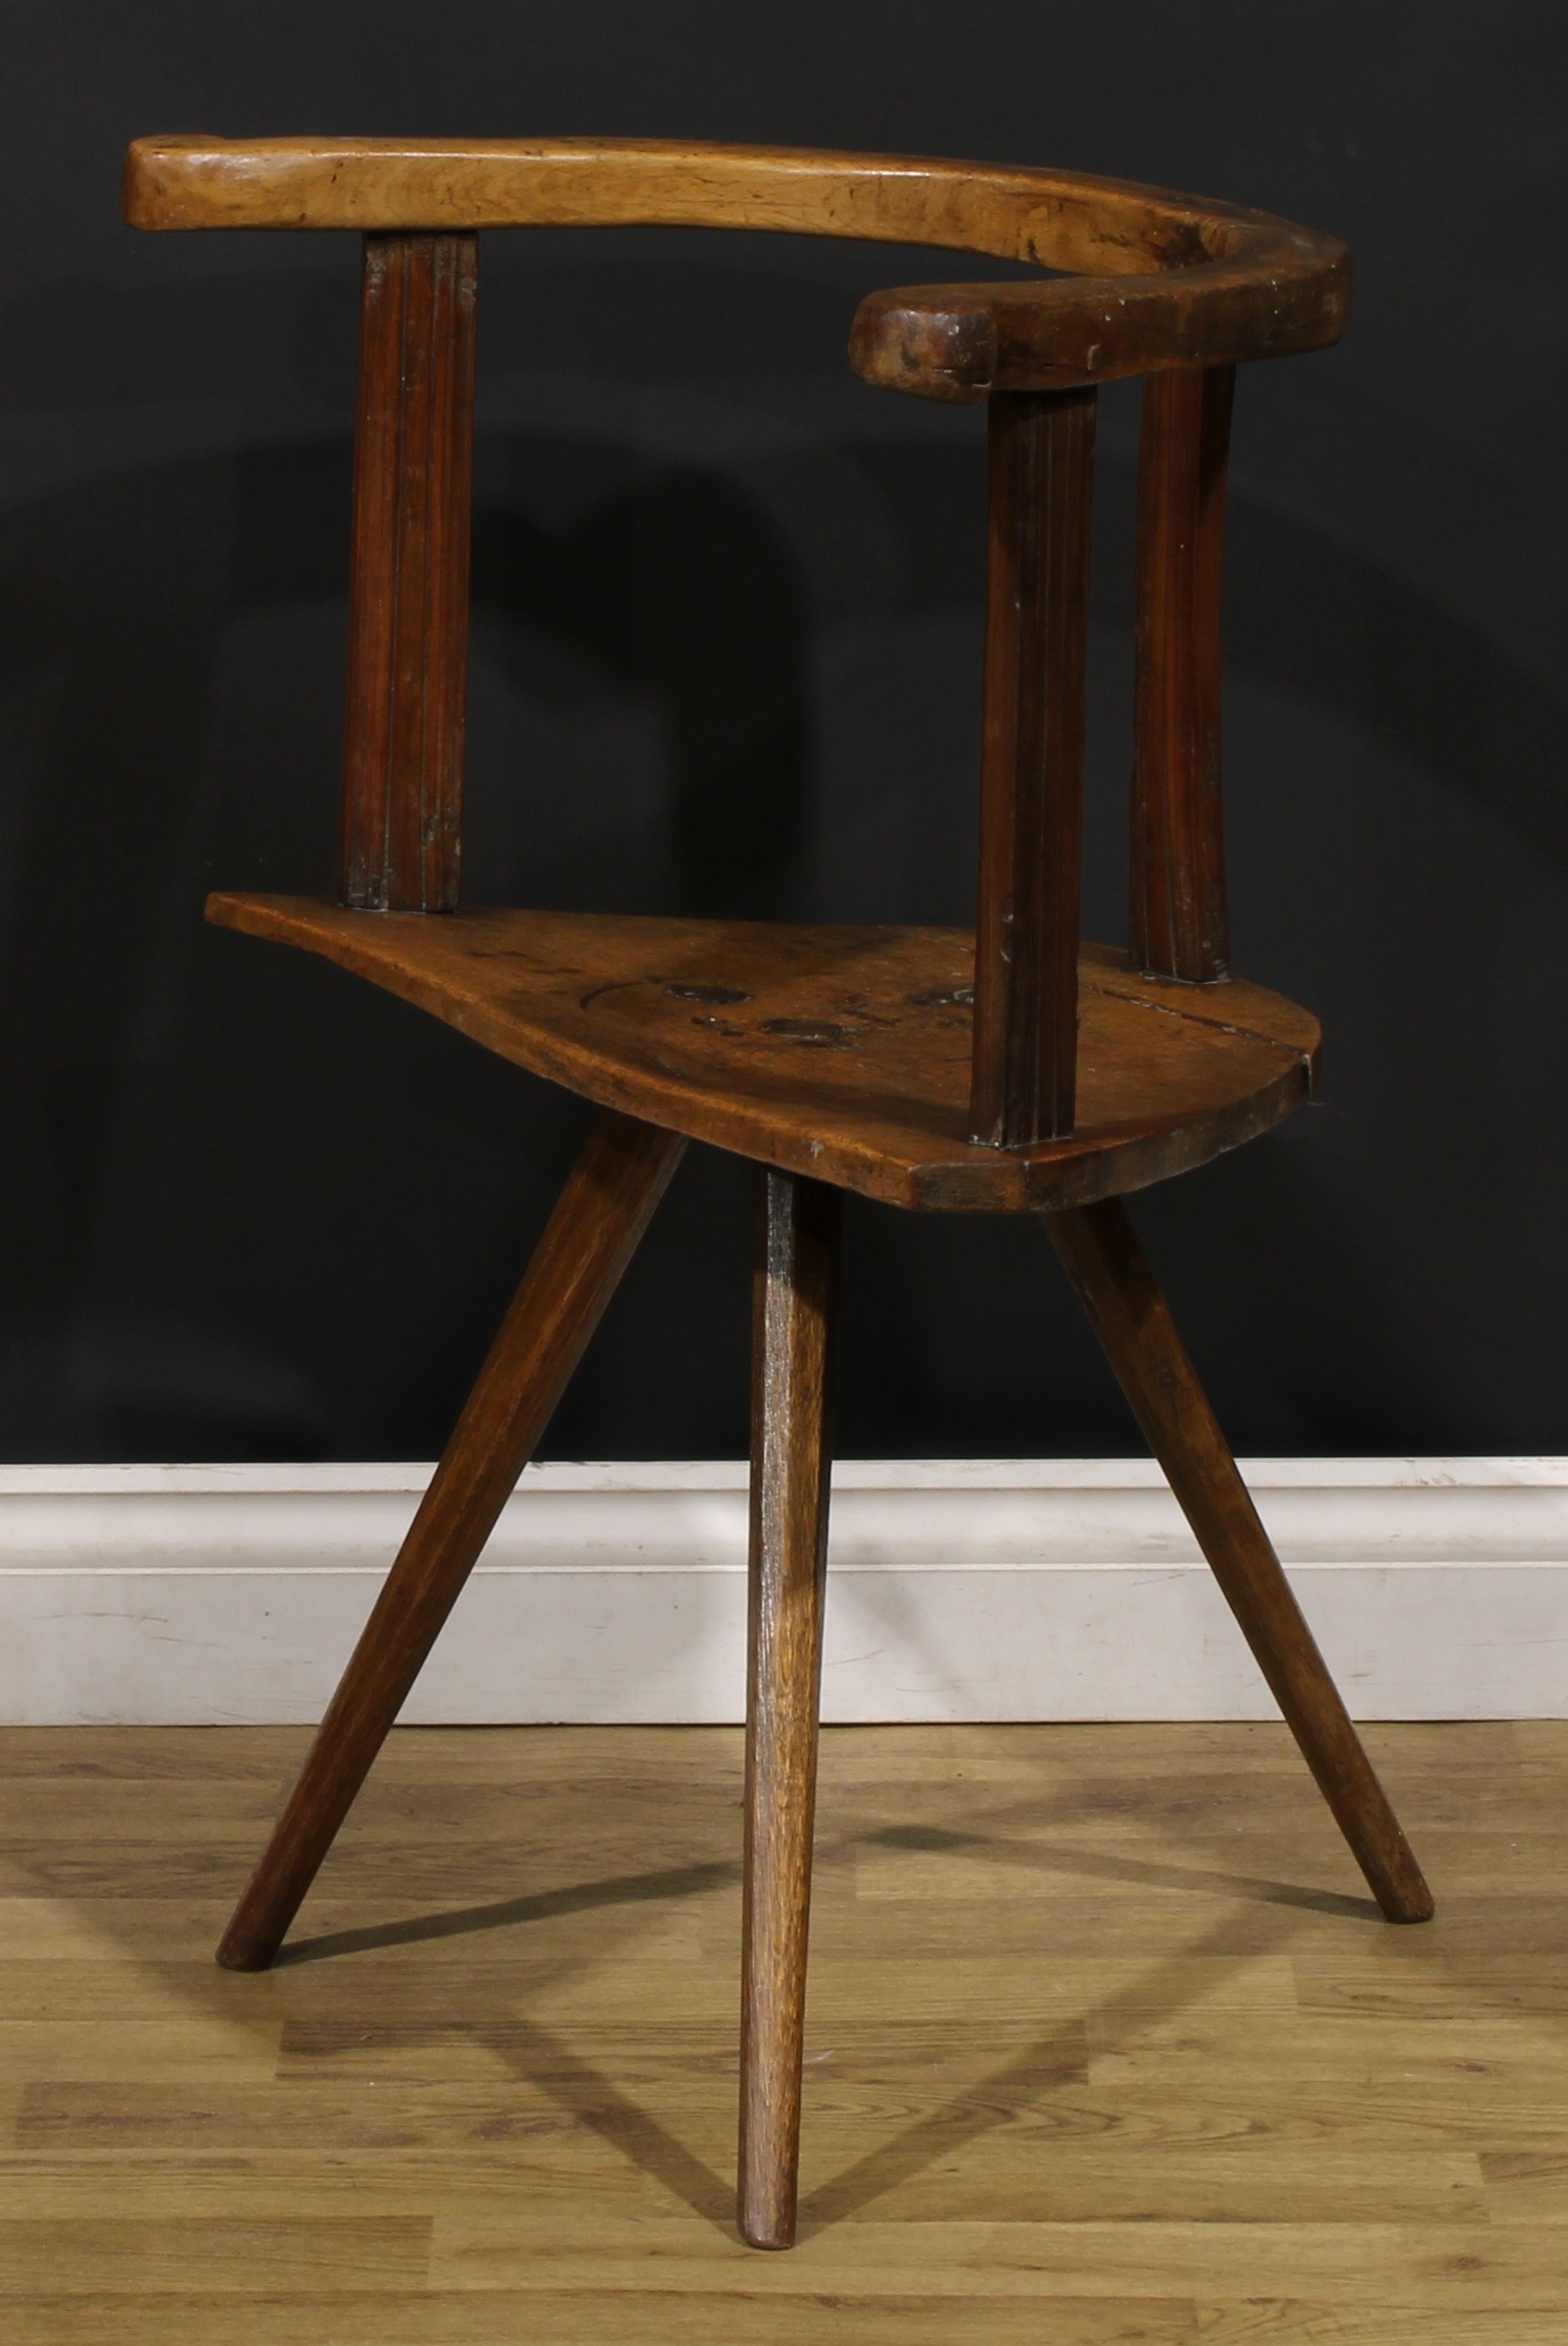 A 19th century primitive and vernacular indigenous timber cricket-form hedge or famine chair, - Image 3 of 4